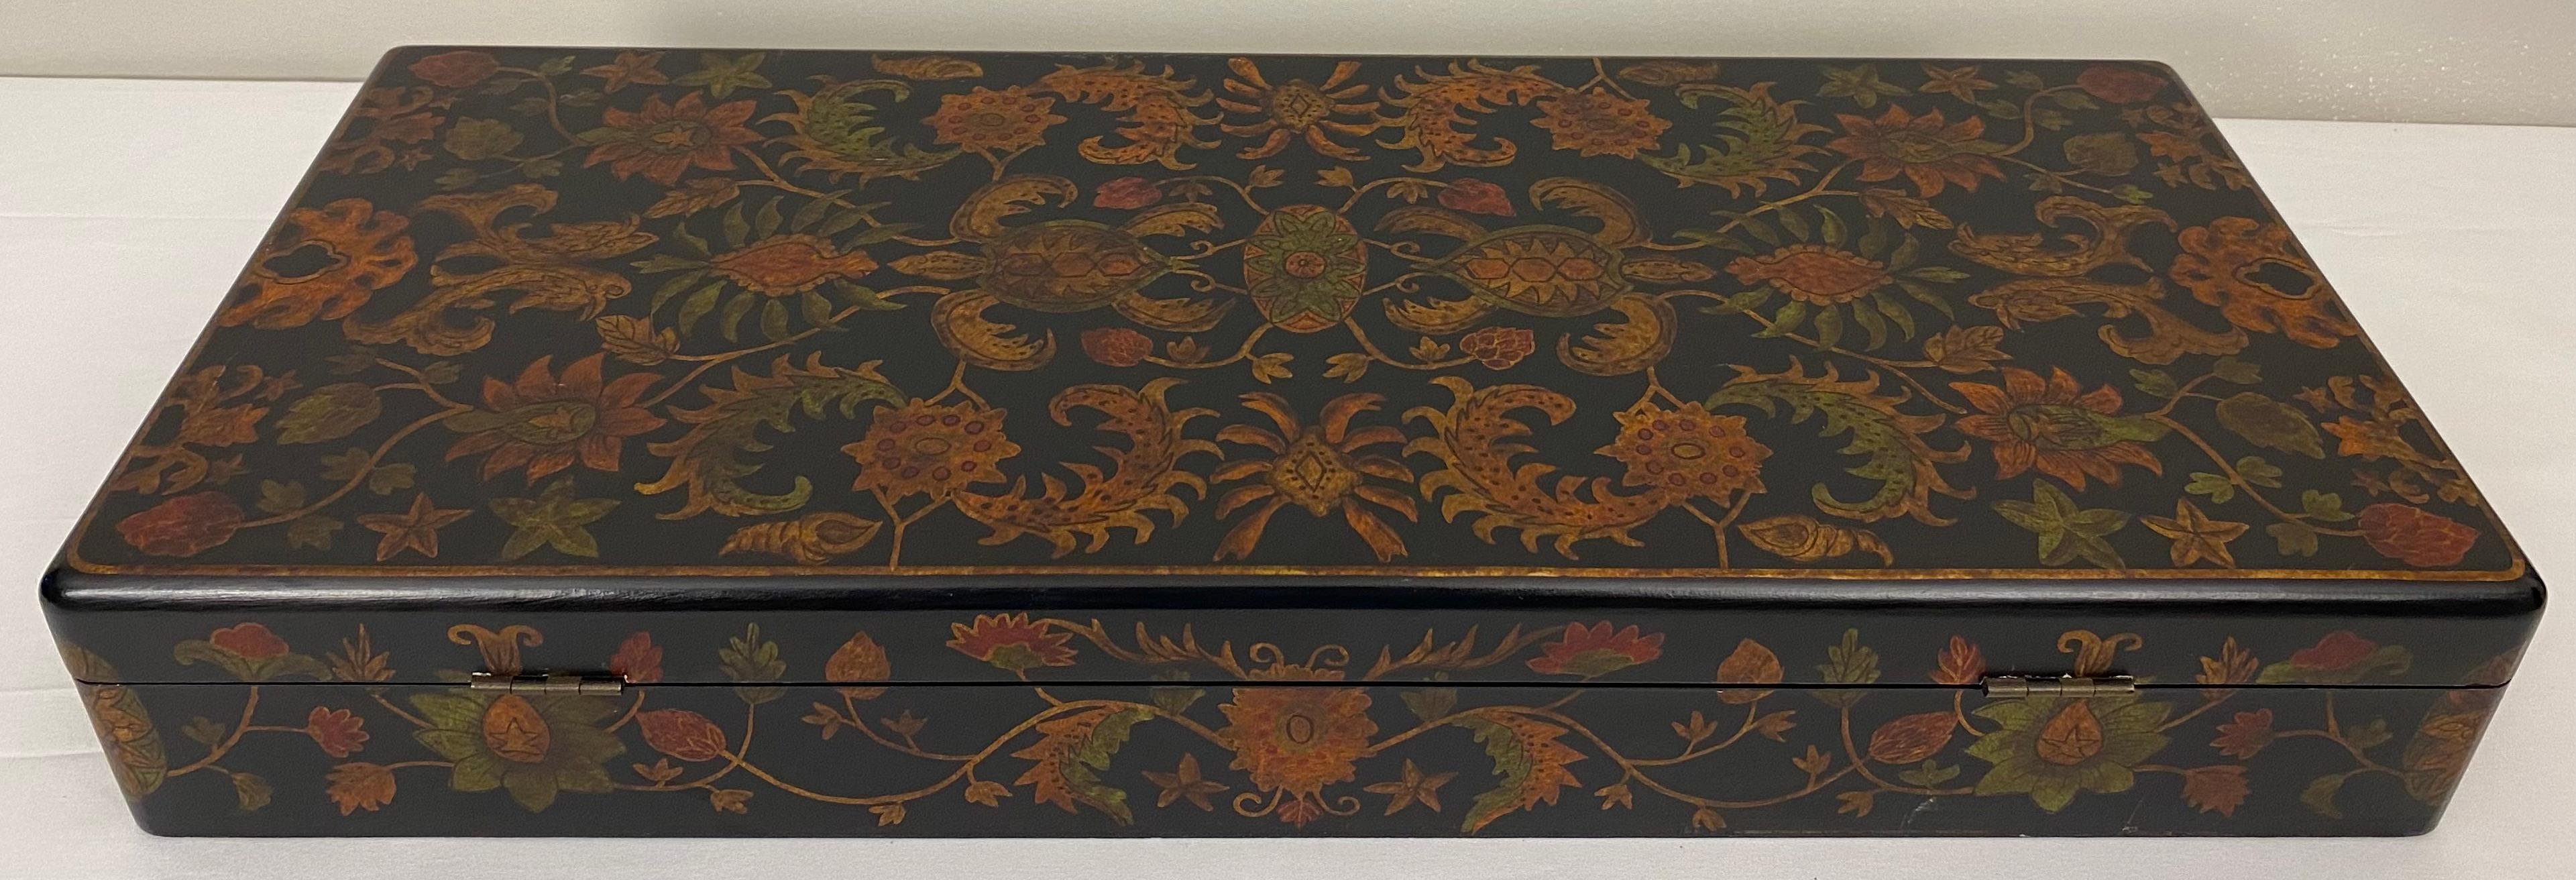 French Large Hand Painted Wooden Jewelry Box For Sale